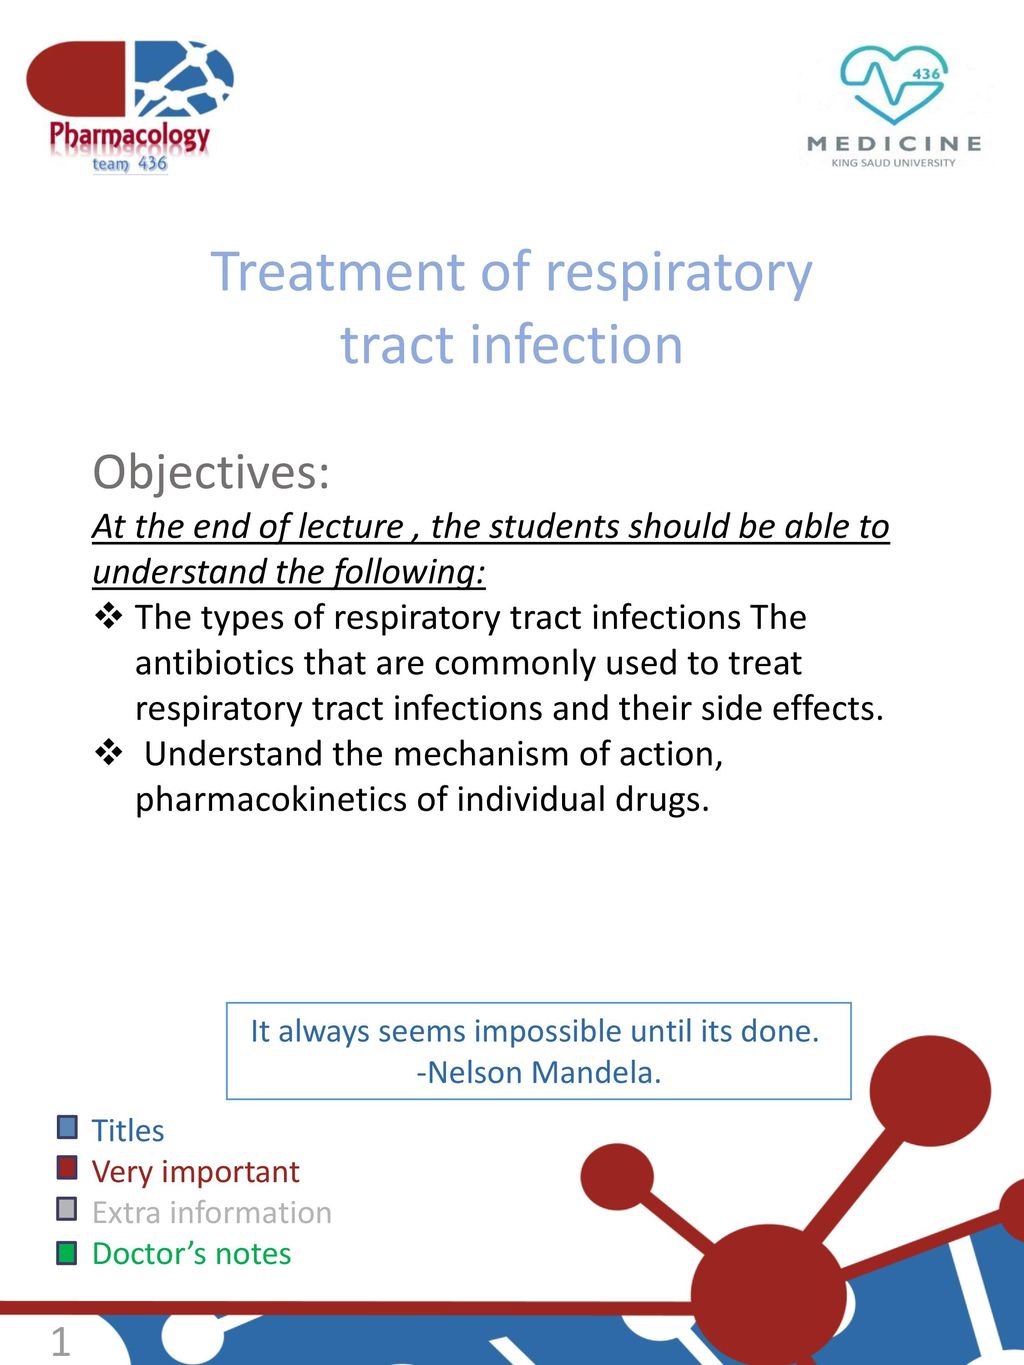 Treatment of respiratory tract infection